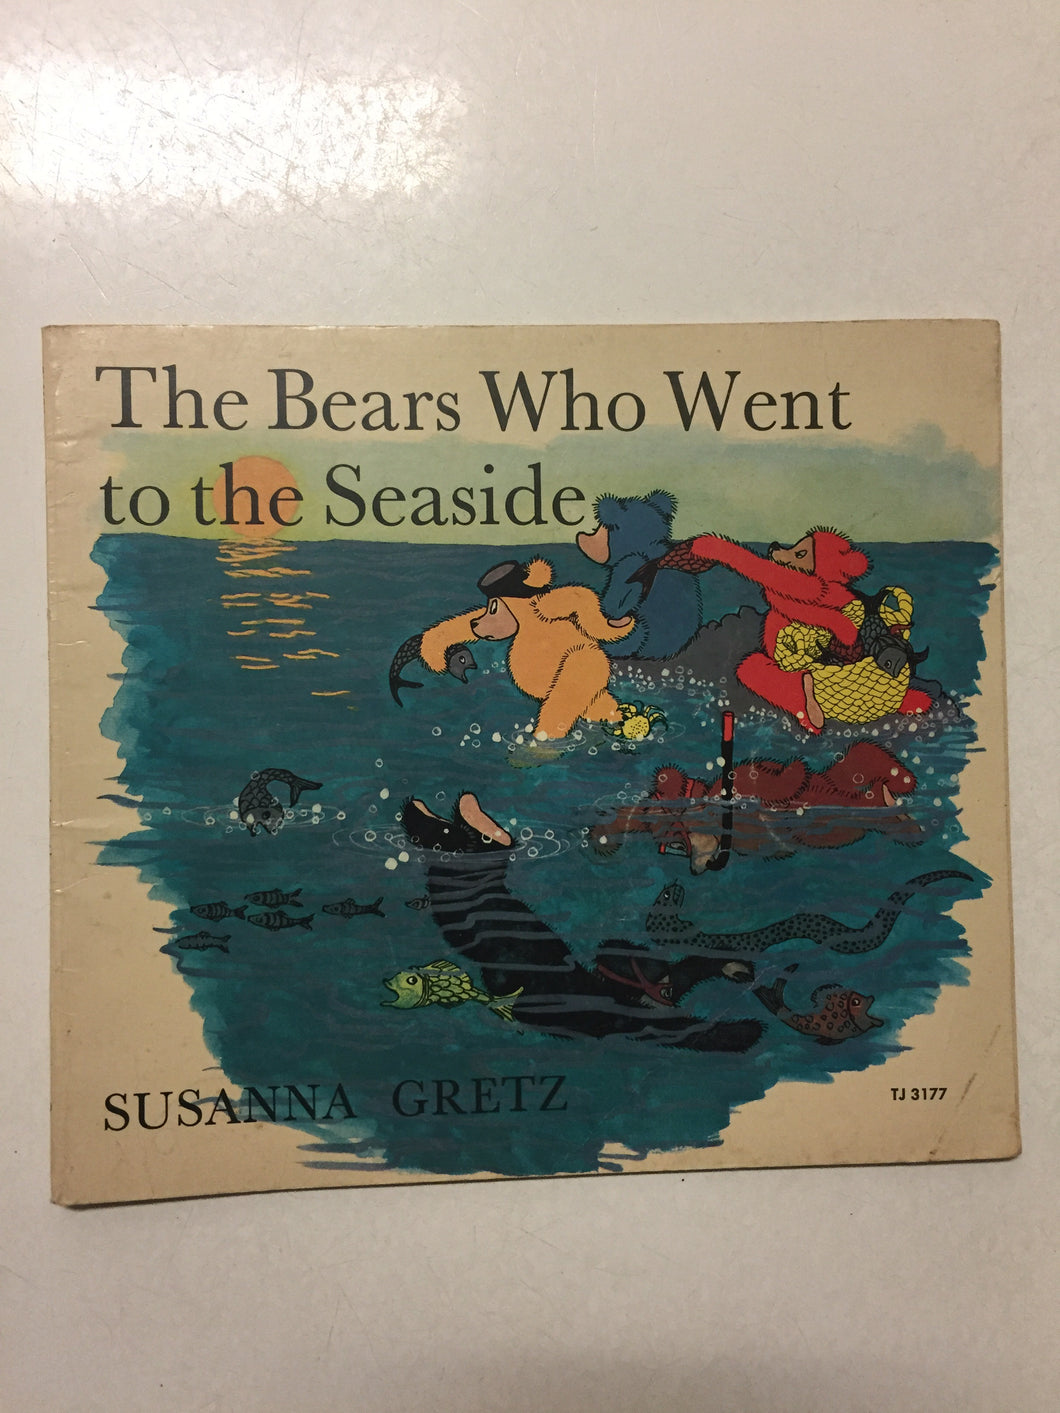 The Bears Who Went to the Seaside - Slickcatbooks